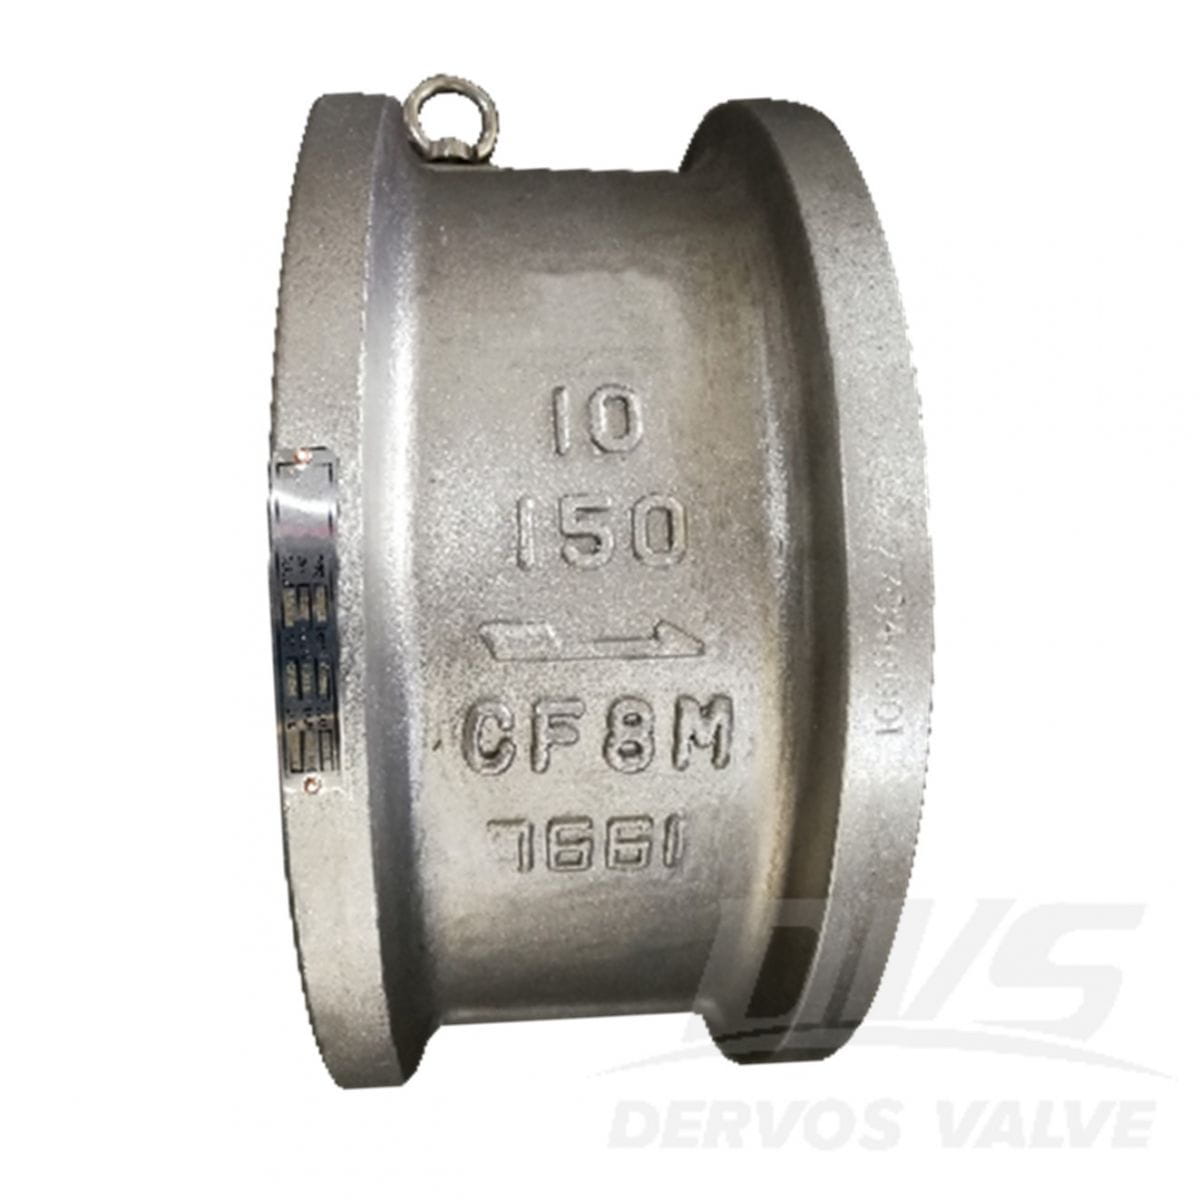 ASTM A351 CF8M Dual Plate Check Valve, API 594, 10IN, CL150